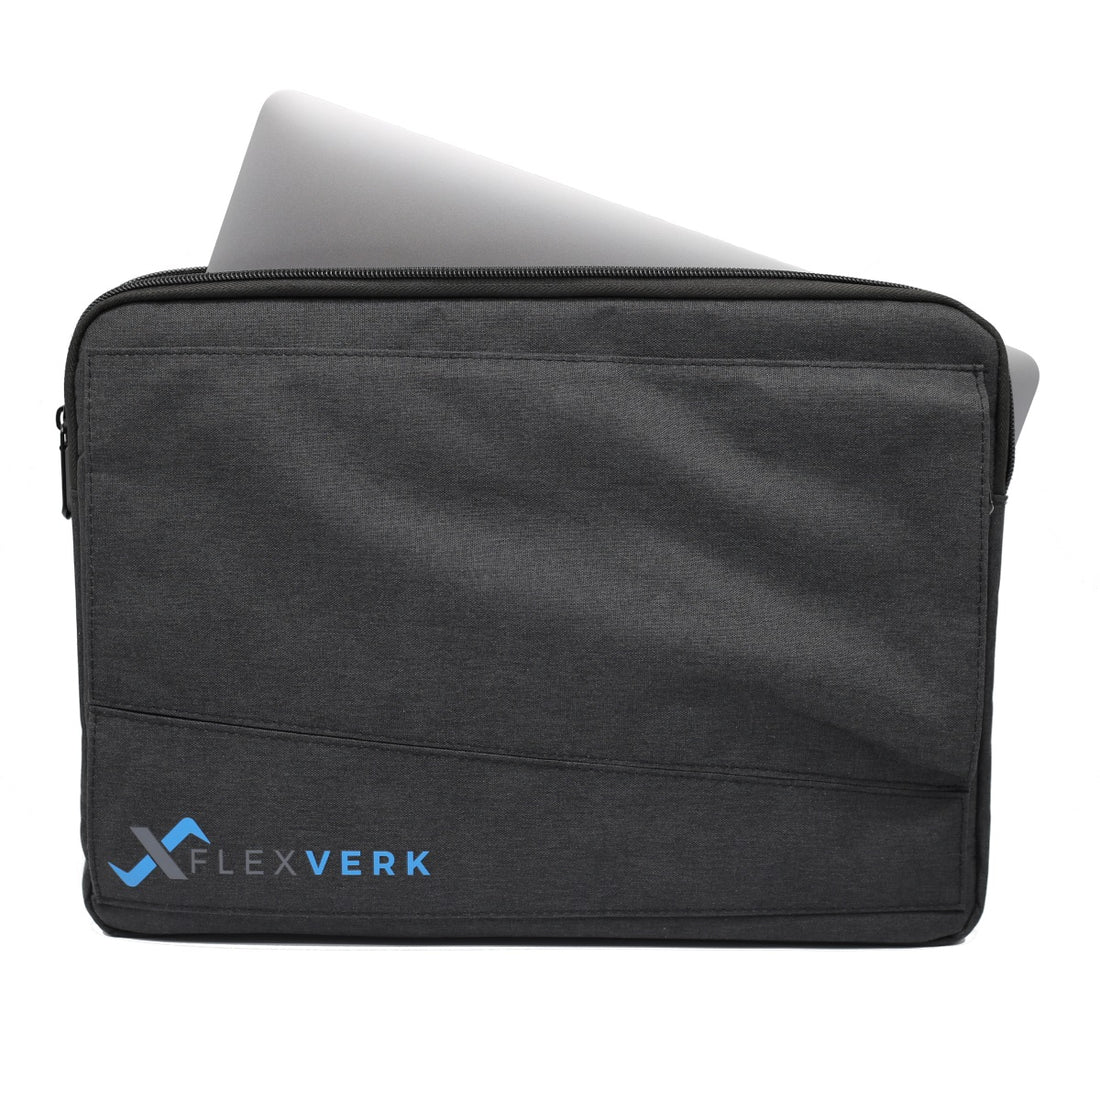 FlexVerk - Portable Laptop Stands and Risers for Remote Work